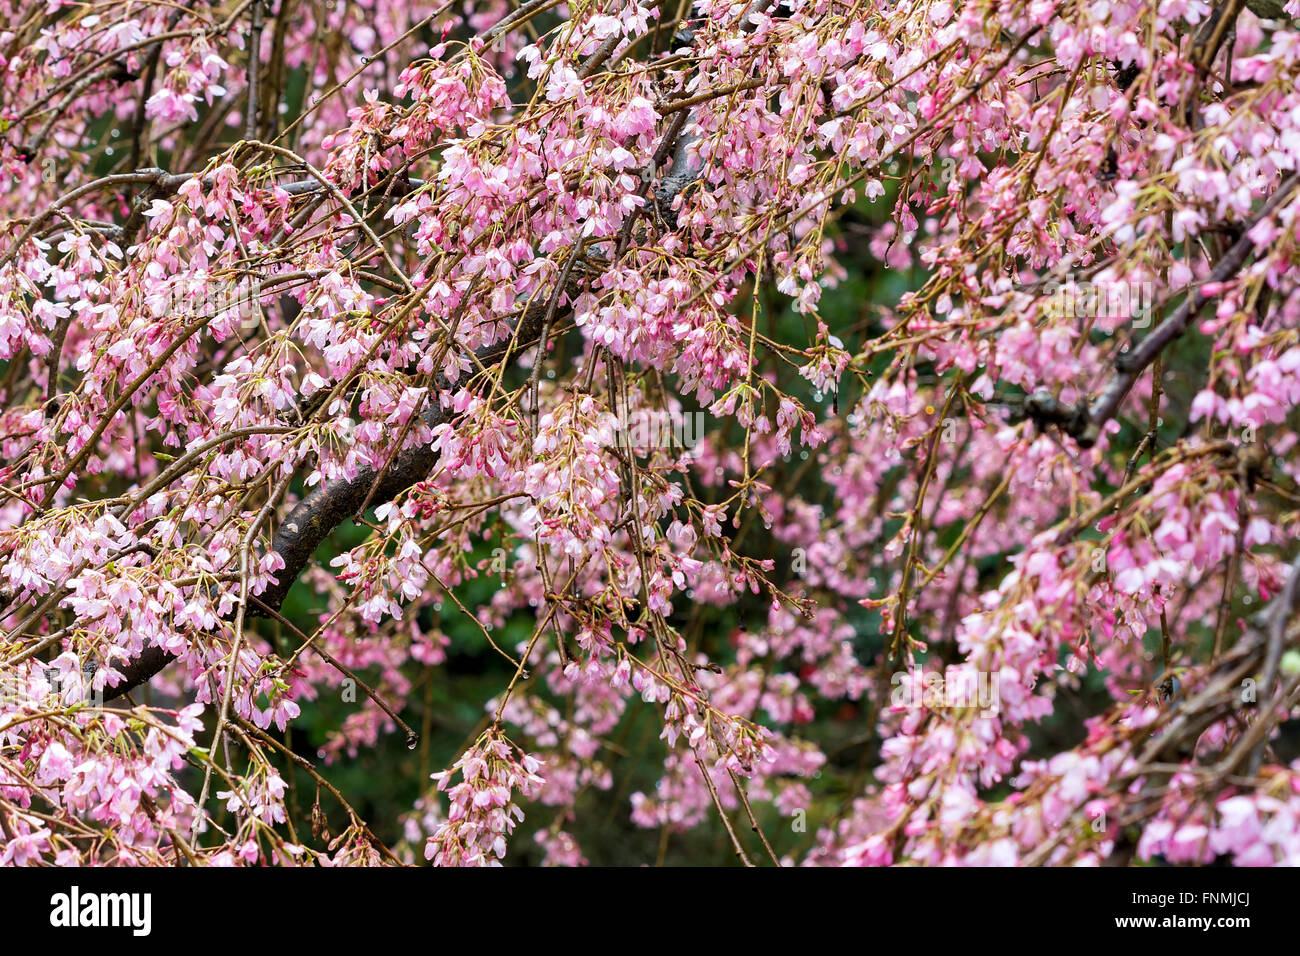 Cherry Blossom Tree with Pink Flowers in full bloom on a rainy day at Japanese Garden Closeup Stock Photo